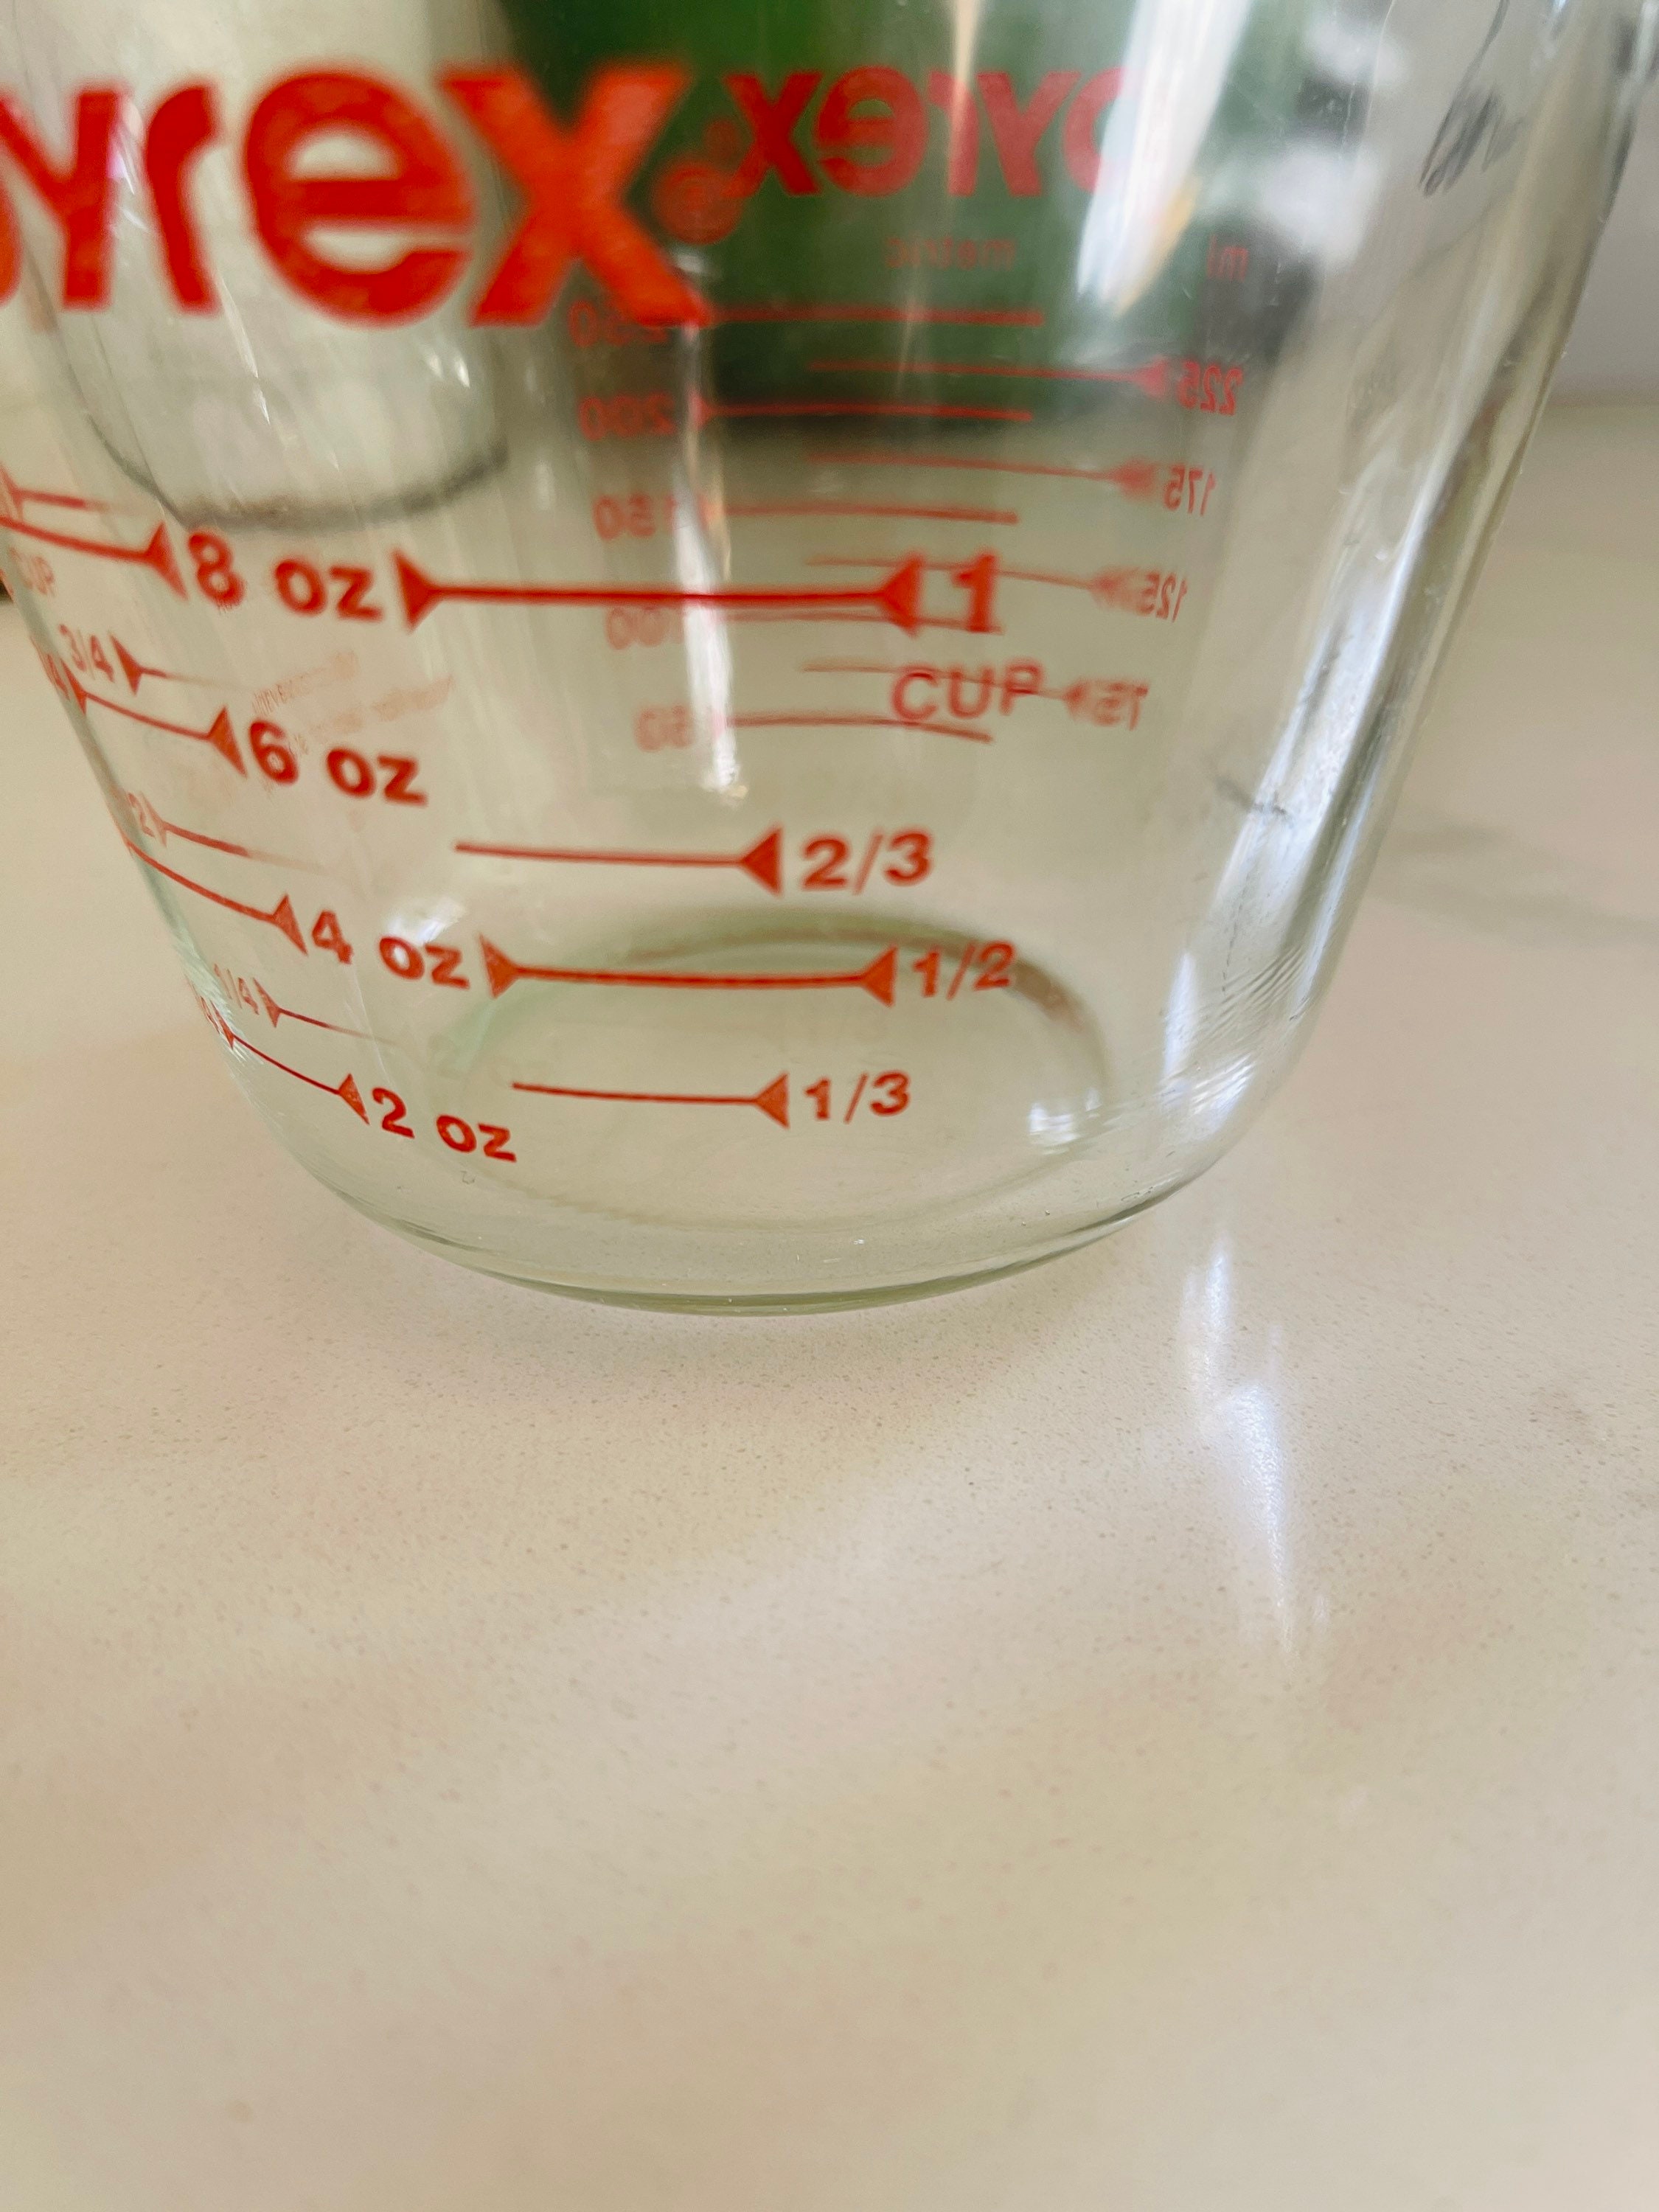 VTG Pyrex Glass Measuring Cup Red Lettering Size 1 Cup 250 ml EUC